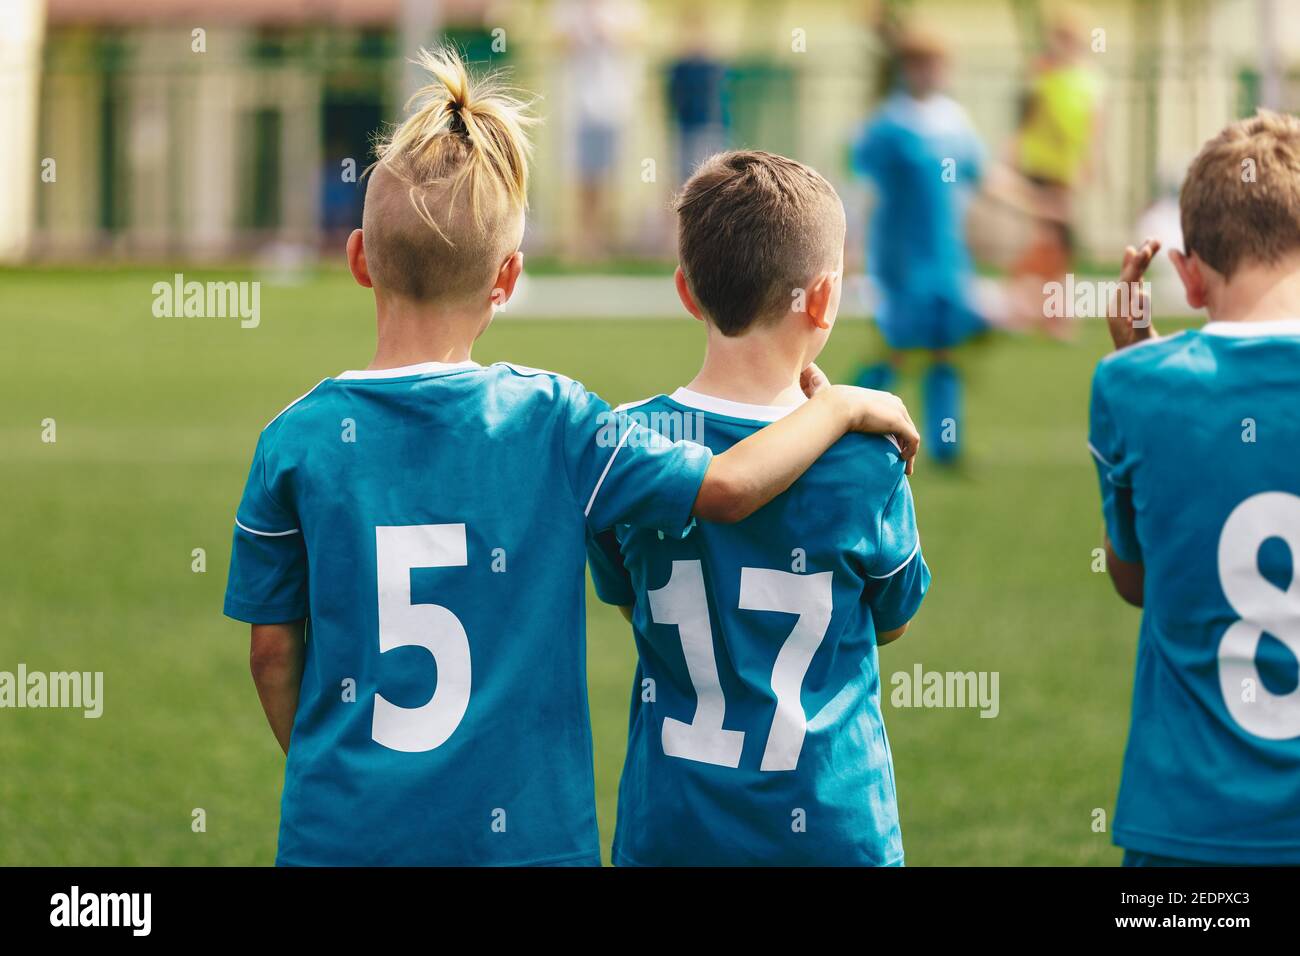 Soccer Boys Teammates. Friendship in a School Sports Team. Happy Kids Standing Together and Watching Football Match Stock Photo